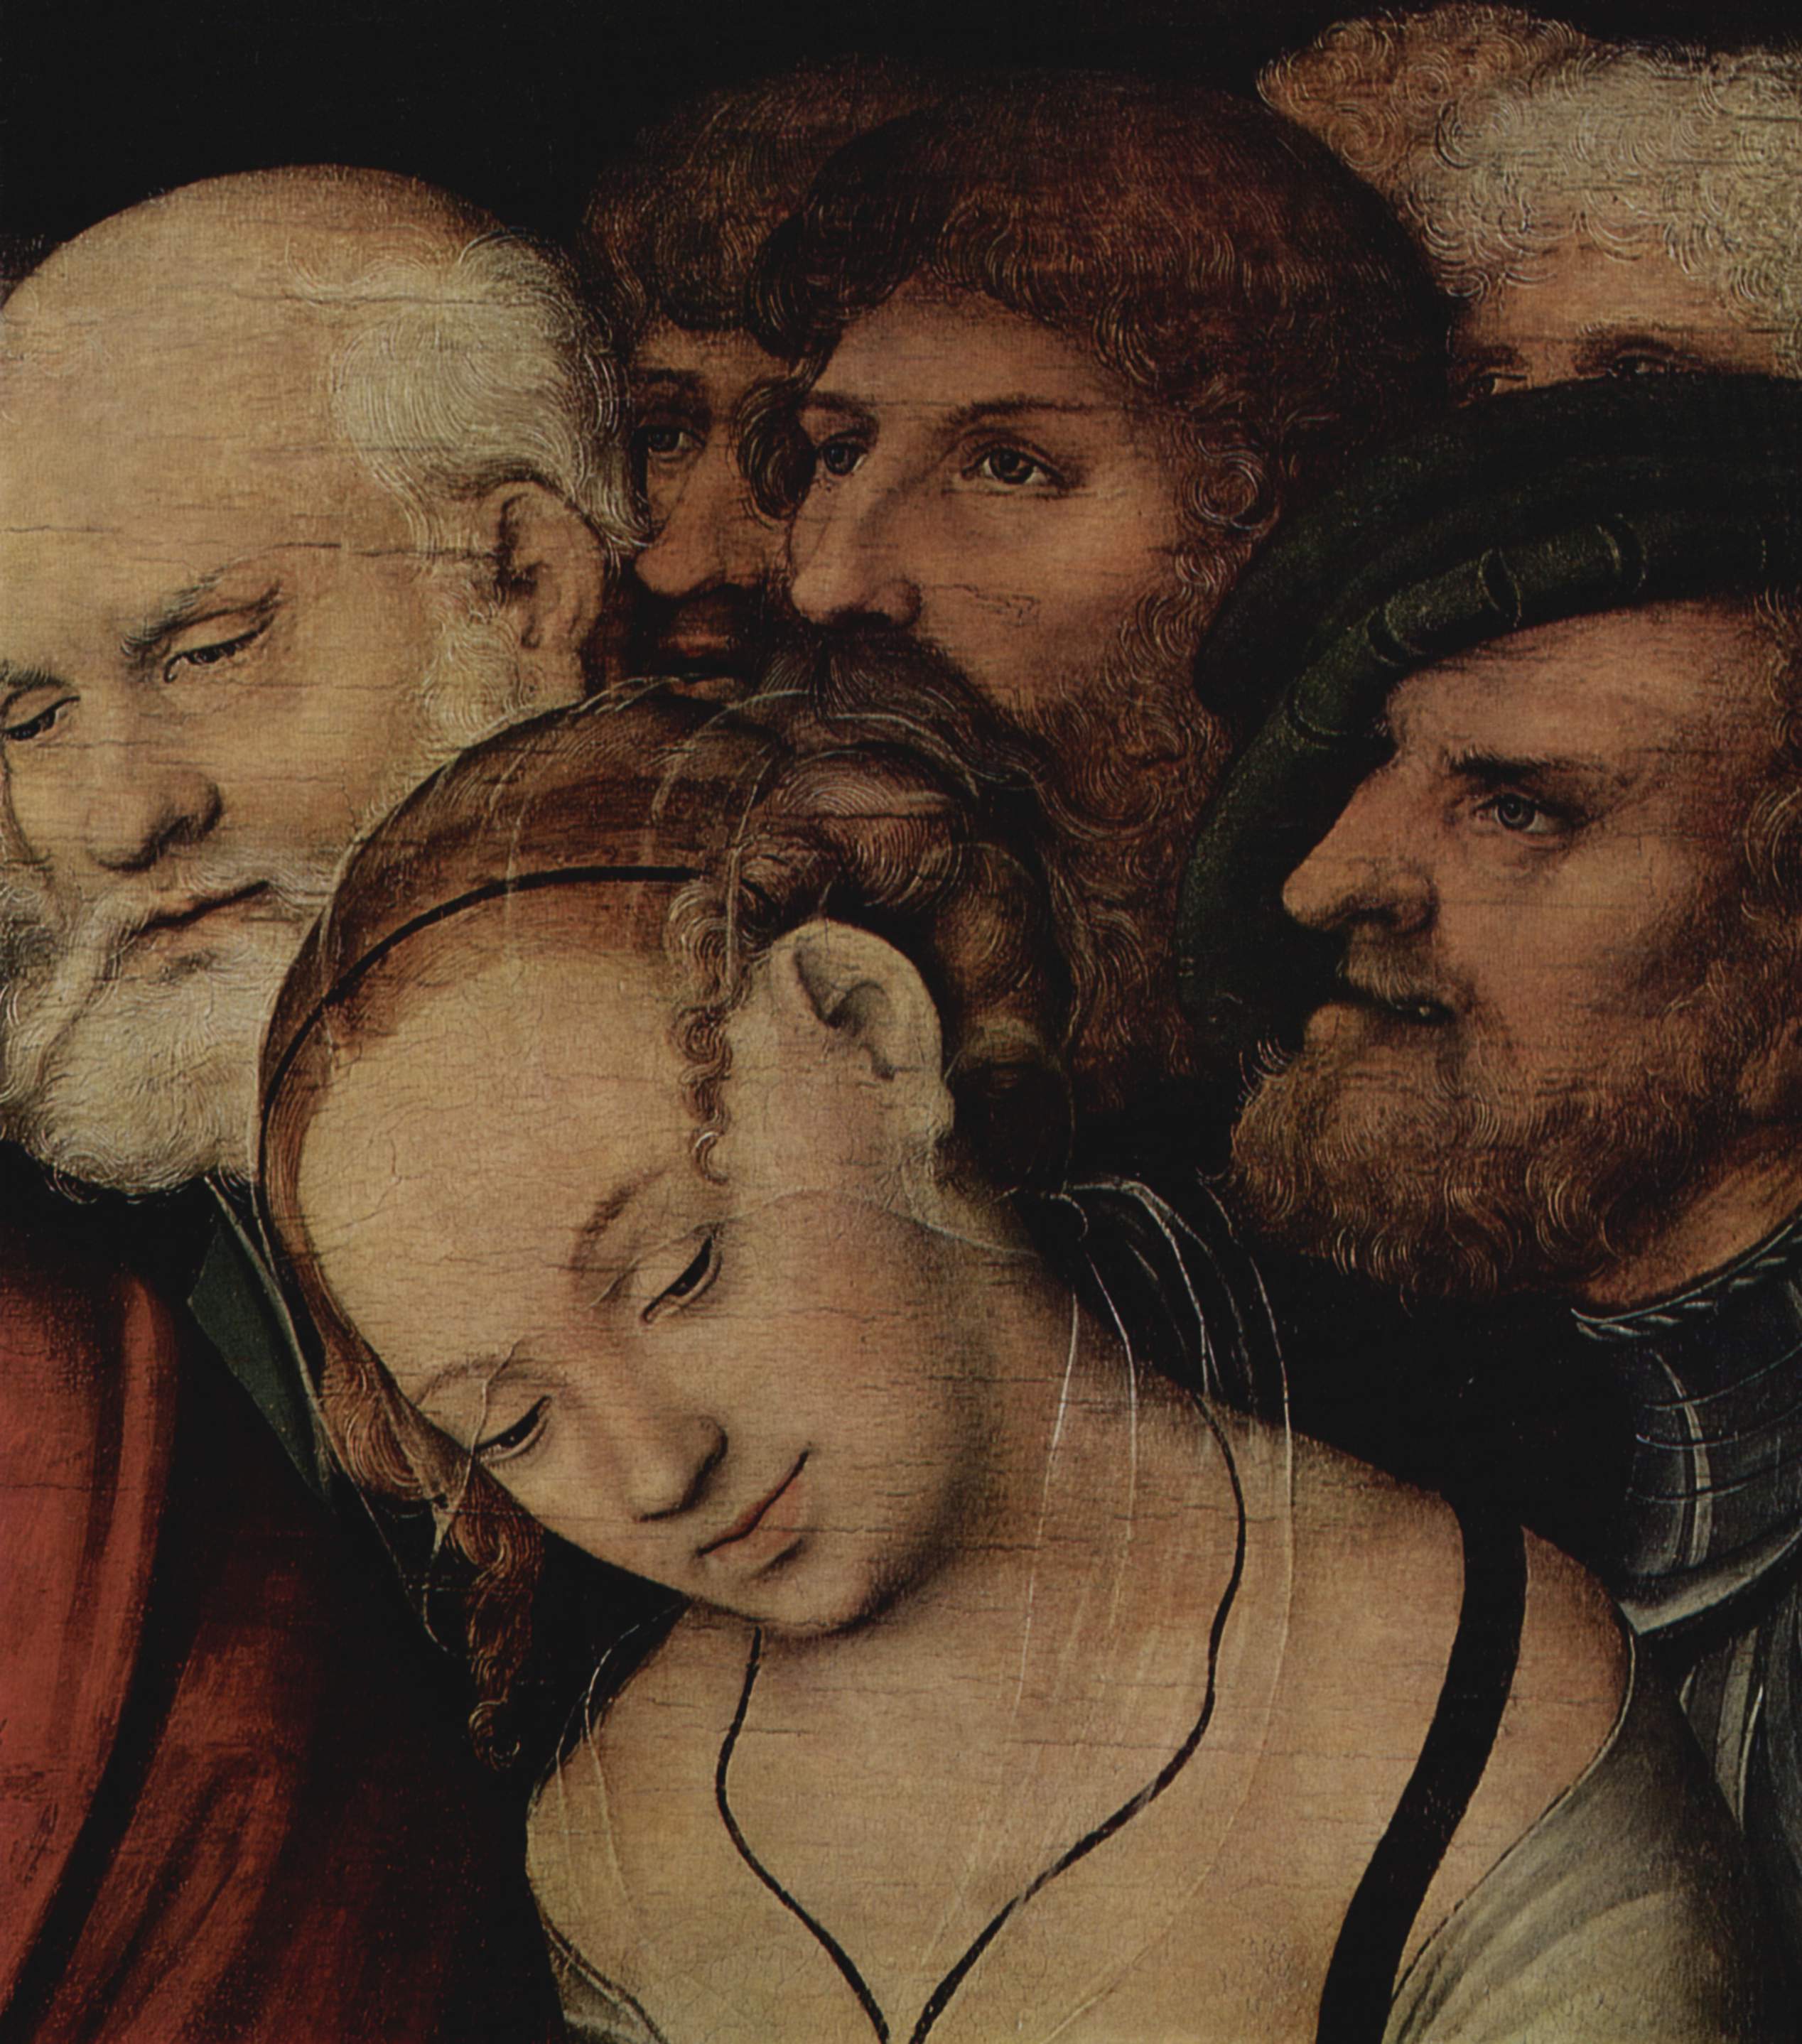 Lucas Cranach (II) - Christ and the woman taken in adultery - detail - Eremitage